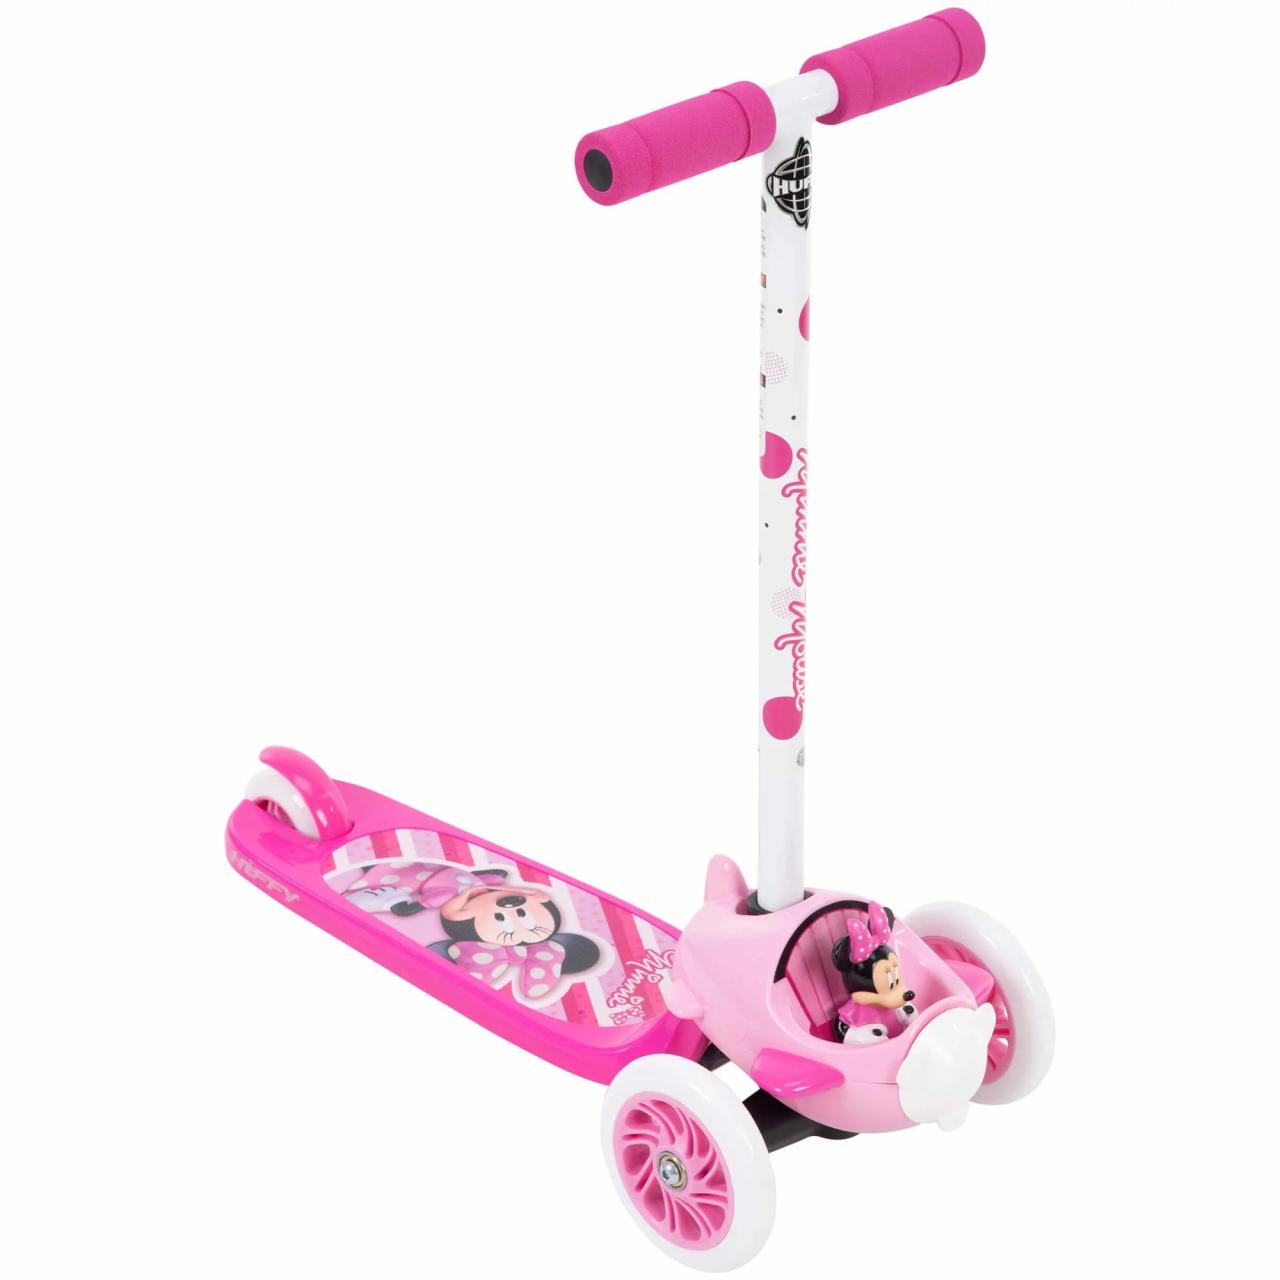 Disney Minnie 3Wheel Toddler Scooter for Kids by Huffy